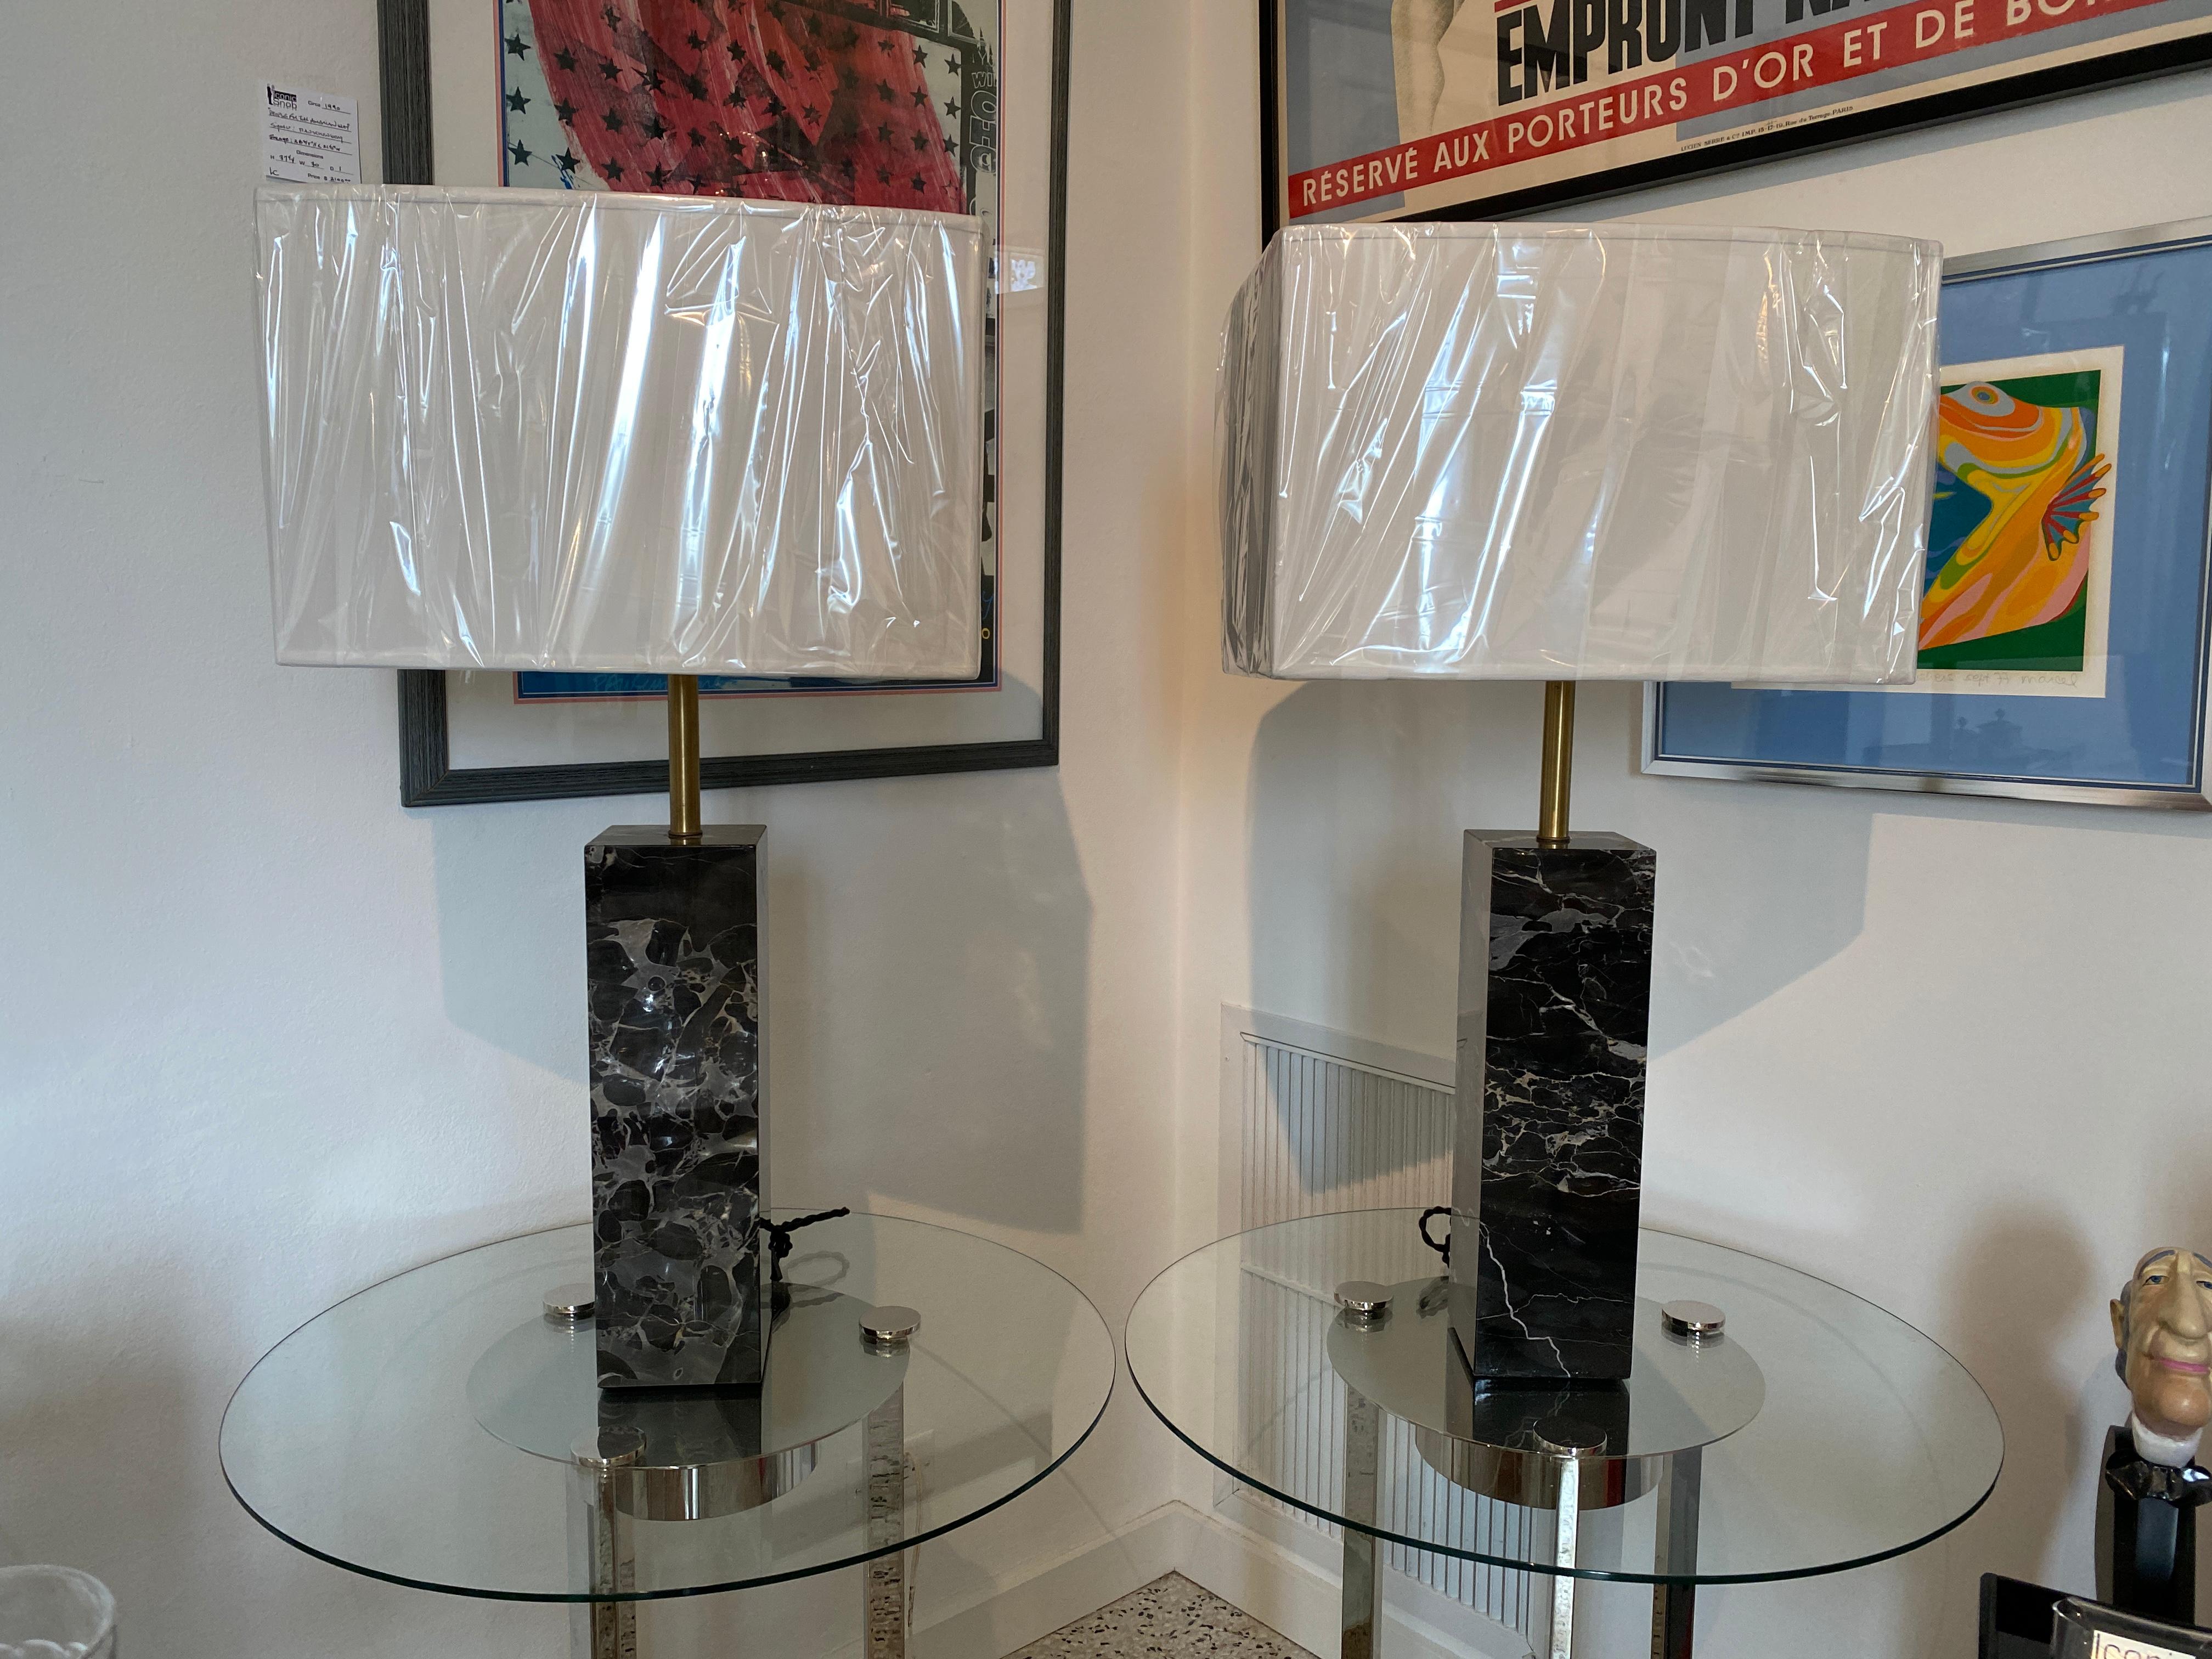 Mid-Century Modern Walter Von Nessen table lamps in black variegated marble with custom shades - a pair - from a Palm Beach estate

Please note the custom rectangular shades are bright white - they are still plastic wrapped.

Note:  Overall size of